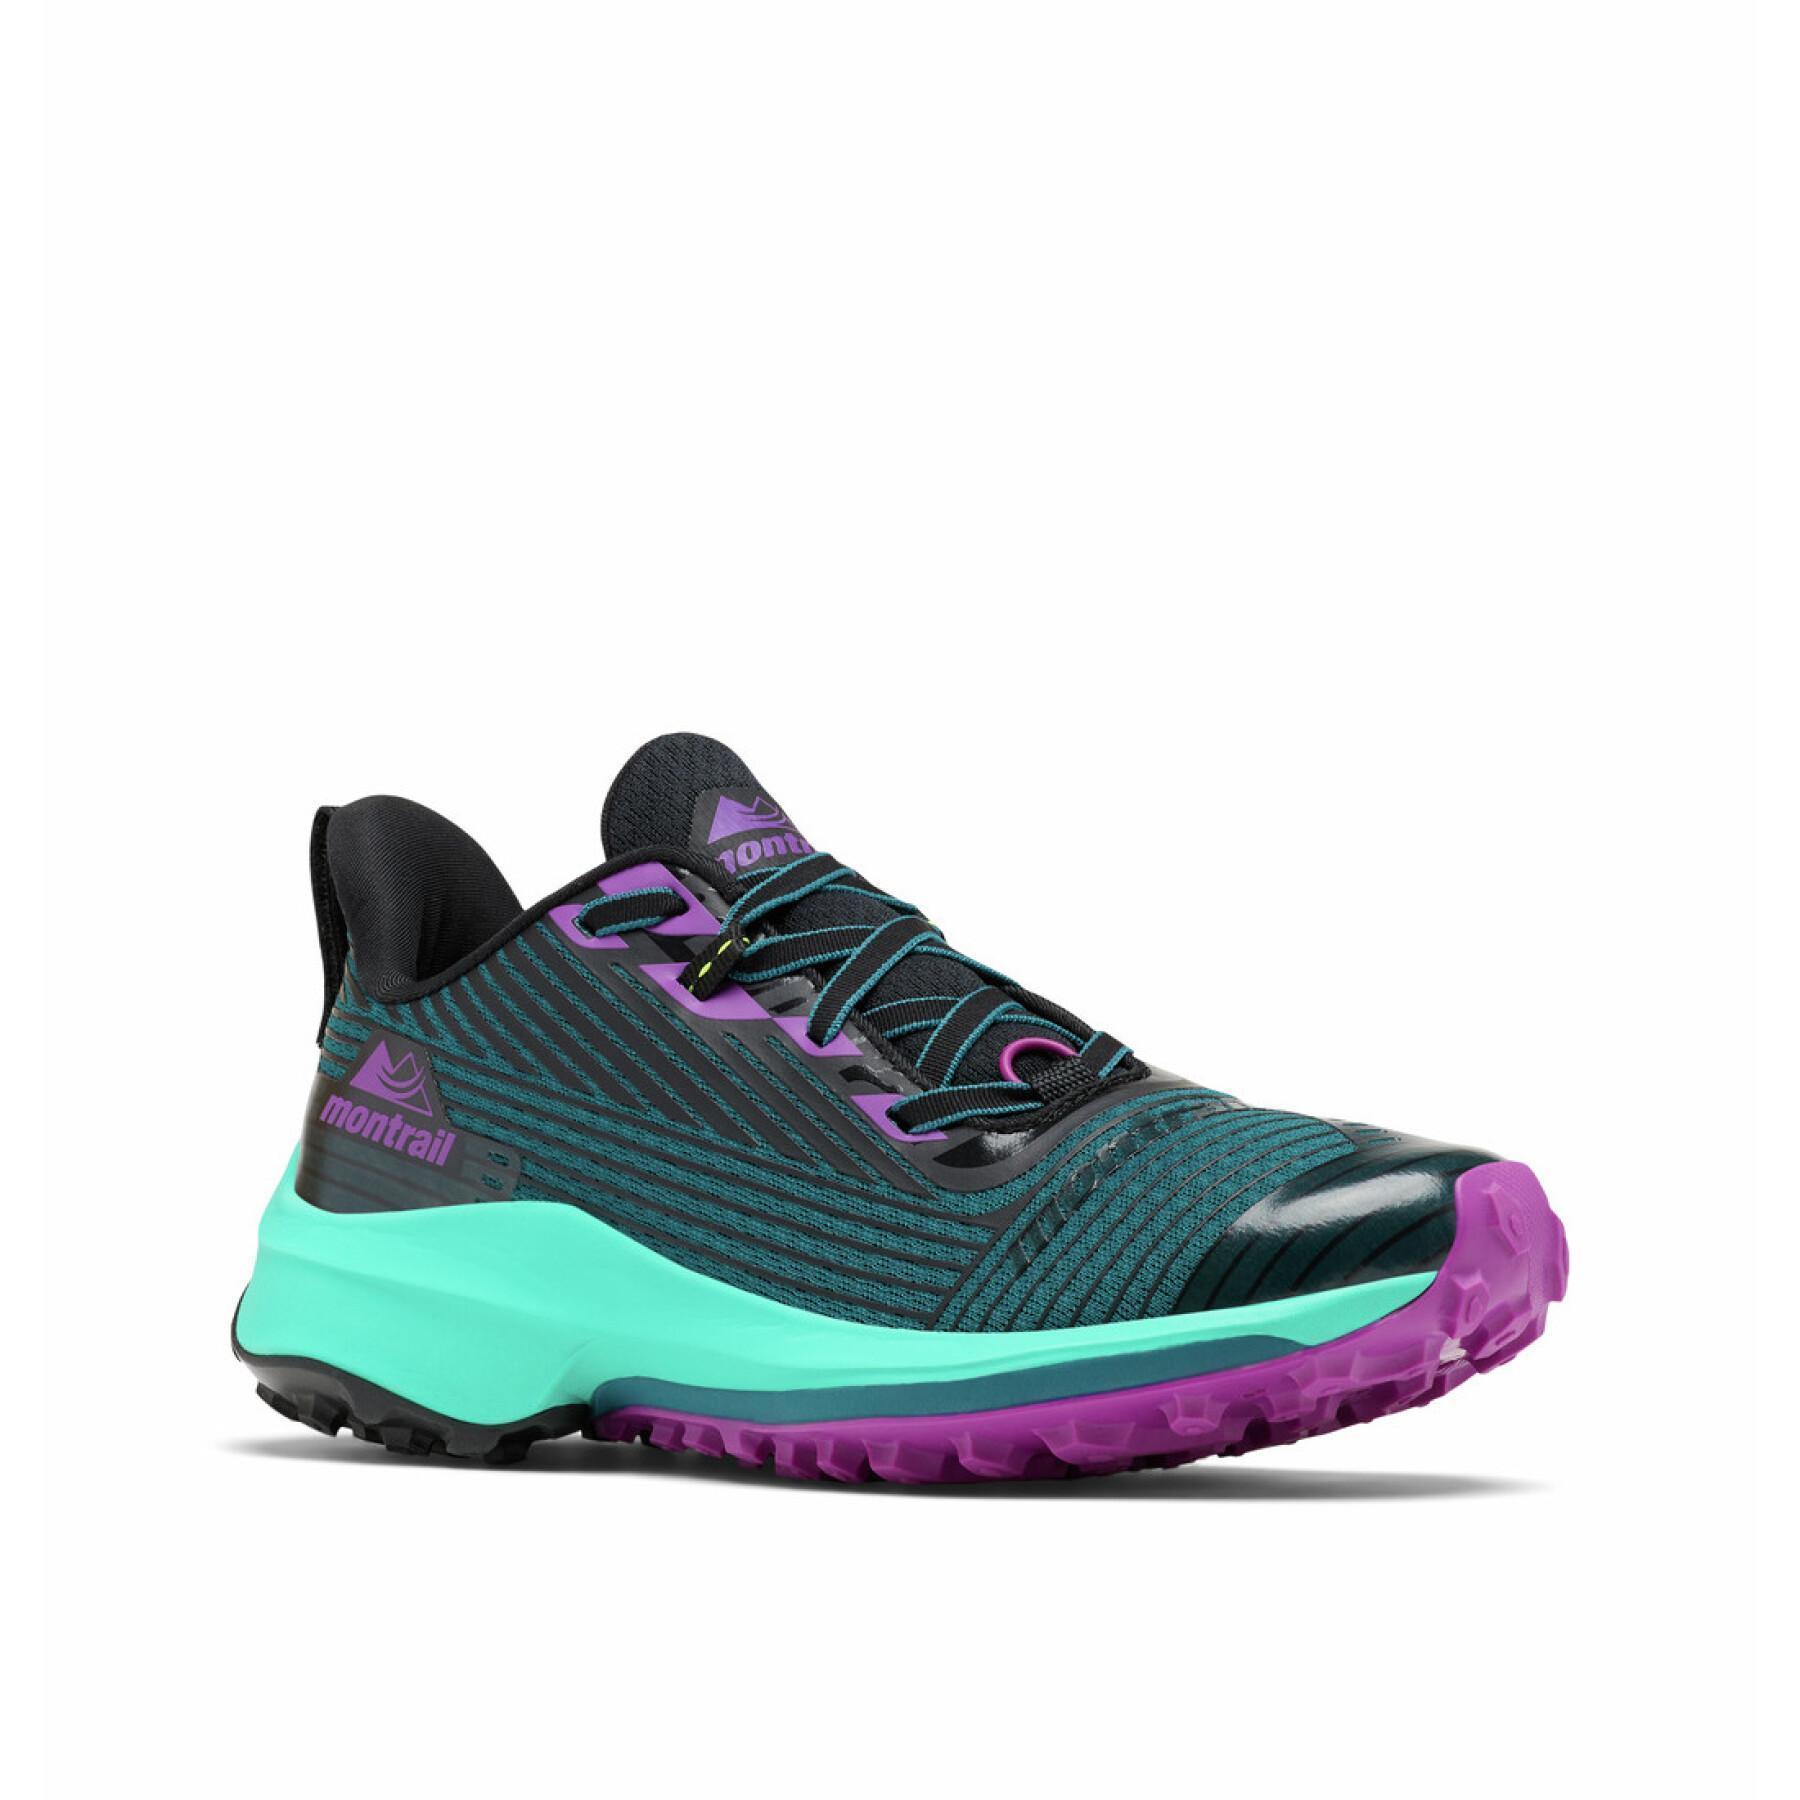 Chaussures femme Columbia Montrail Trinity Ag